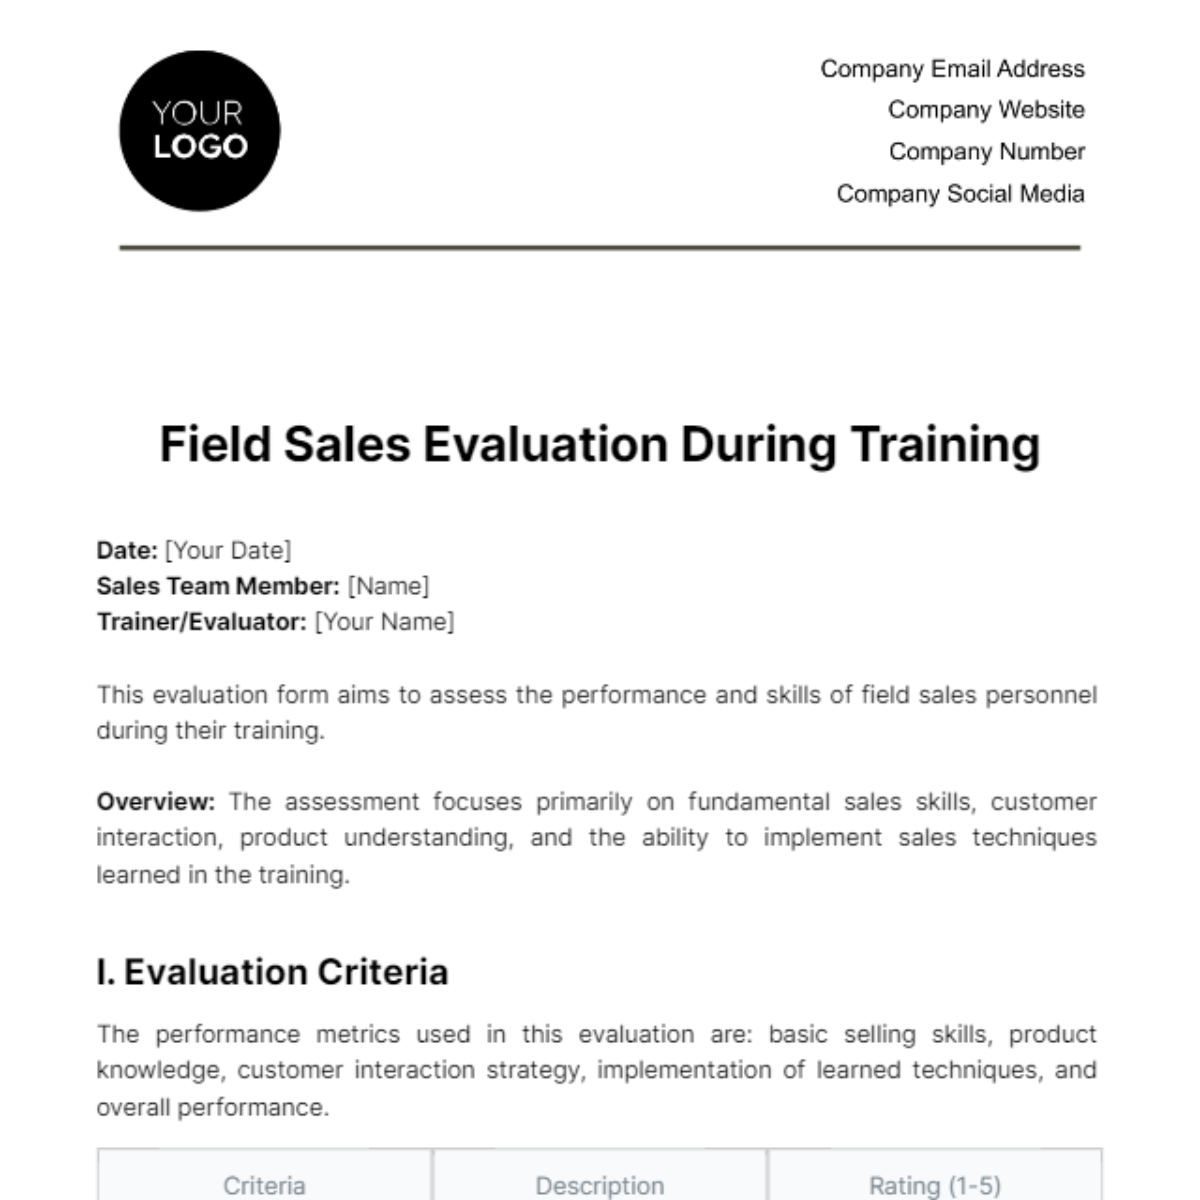 Field Sales Evaluation During Training Template